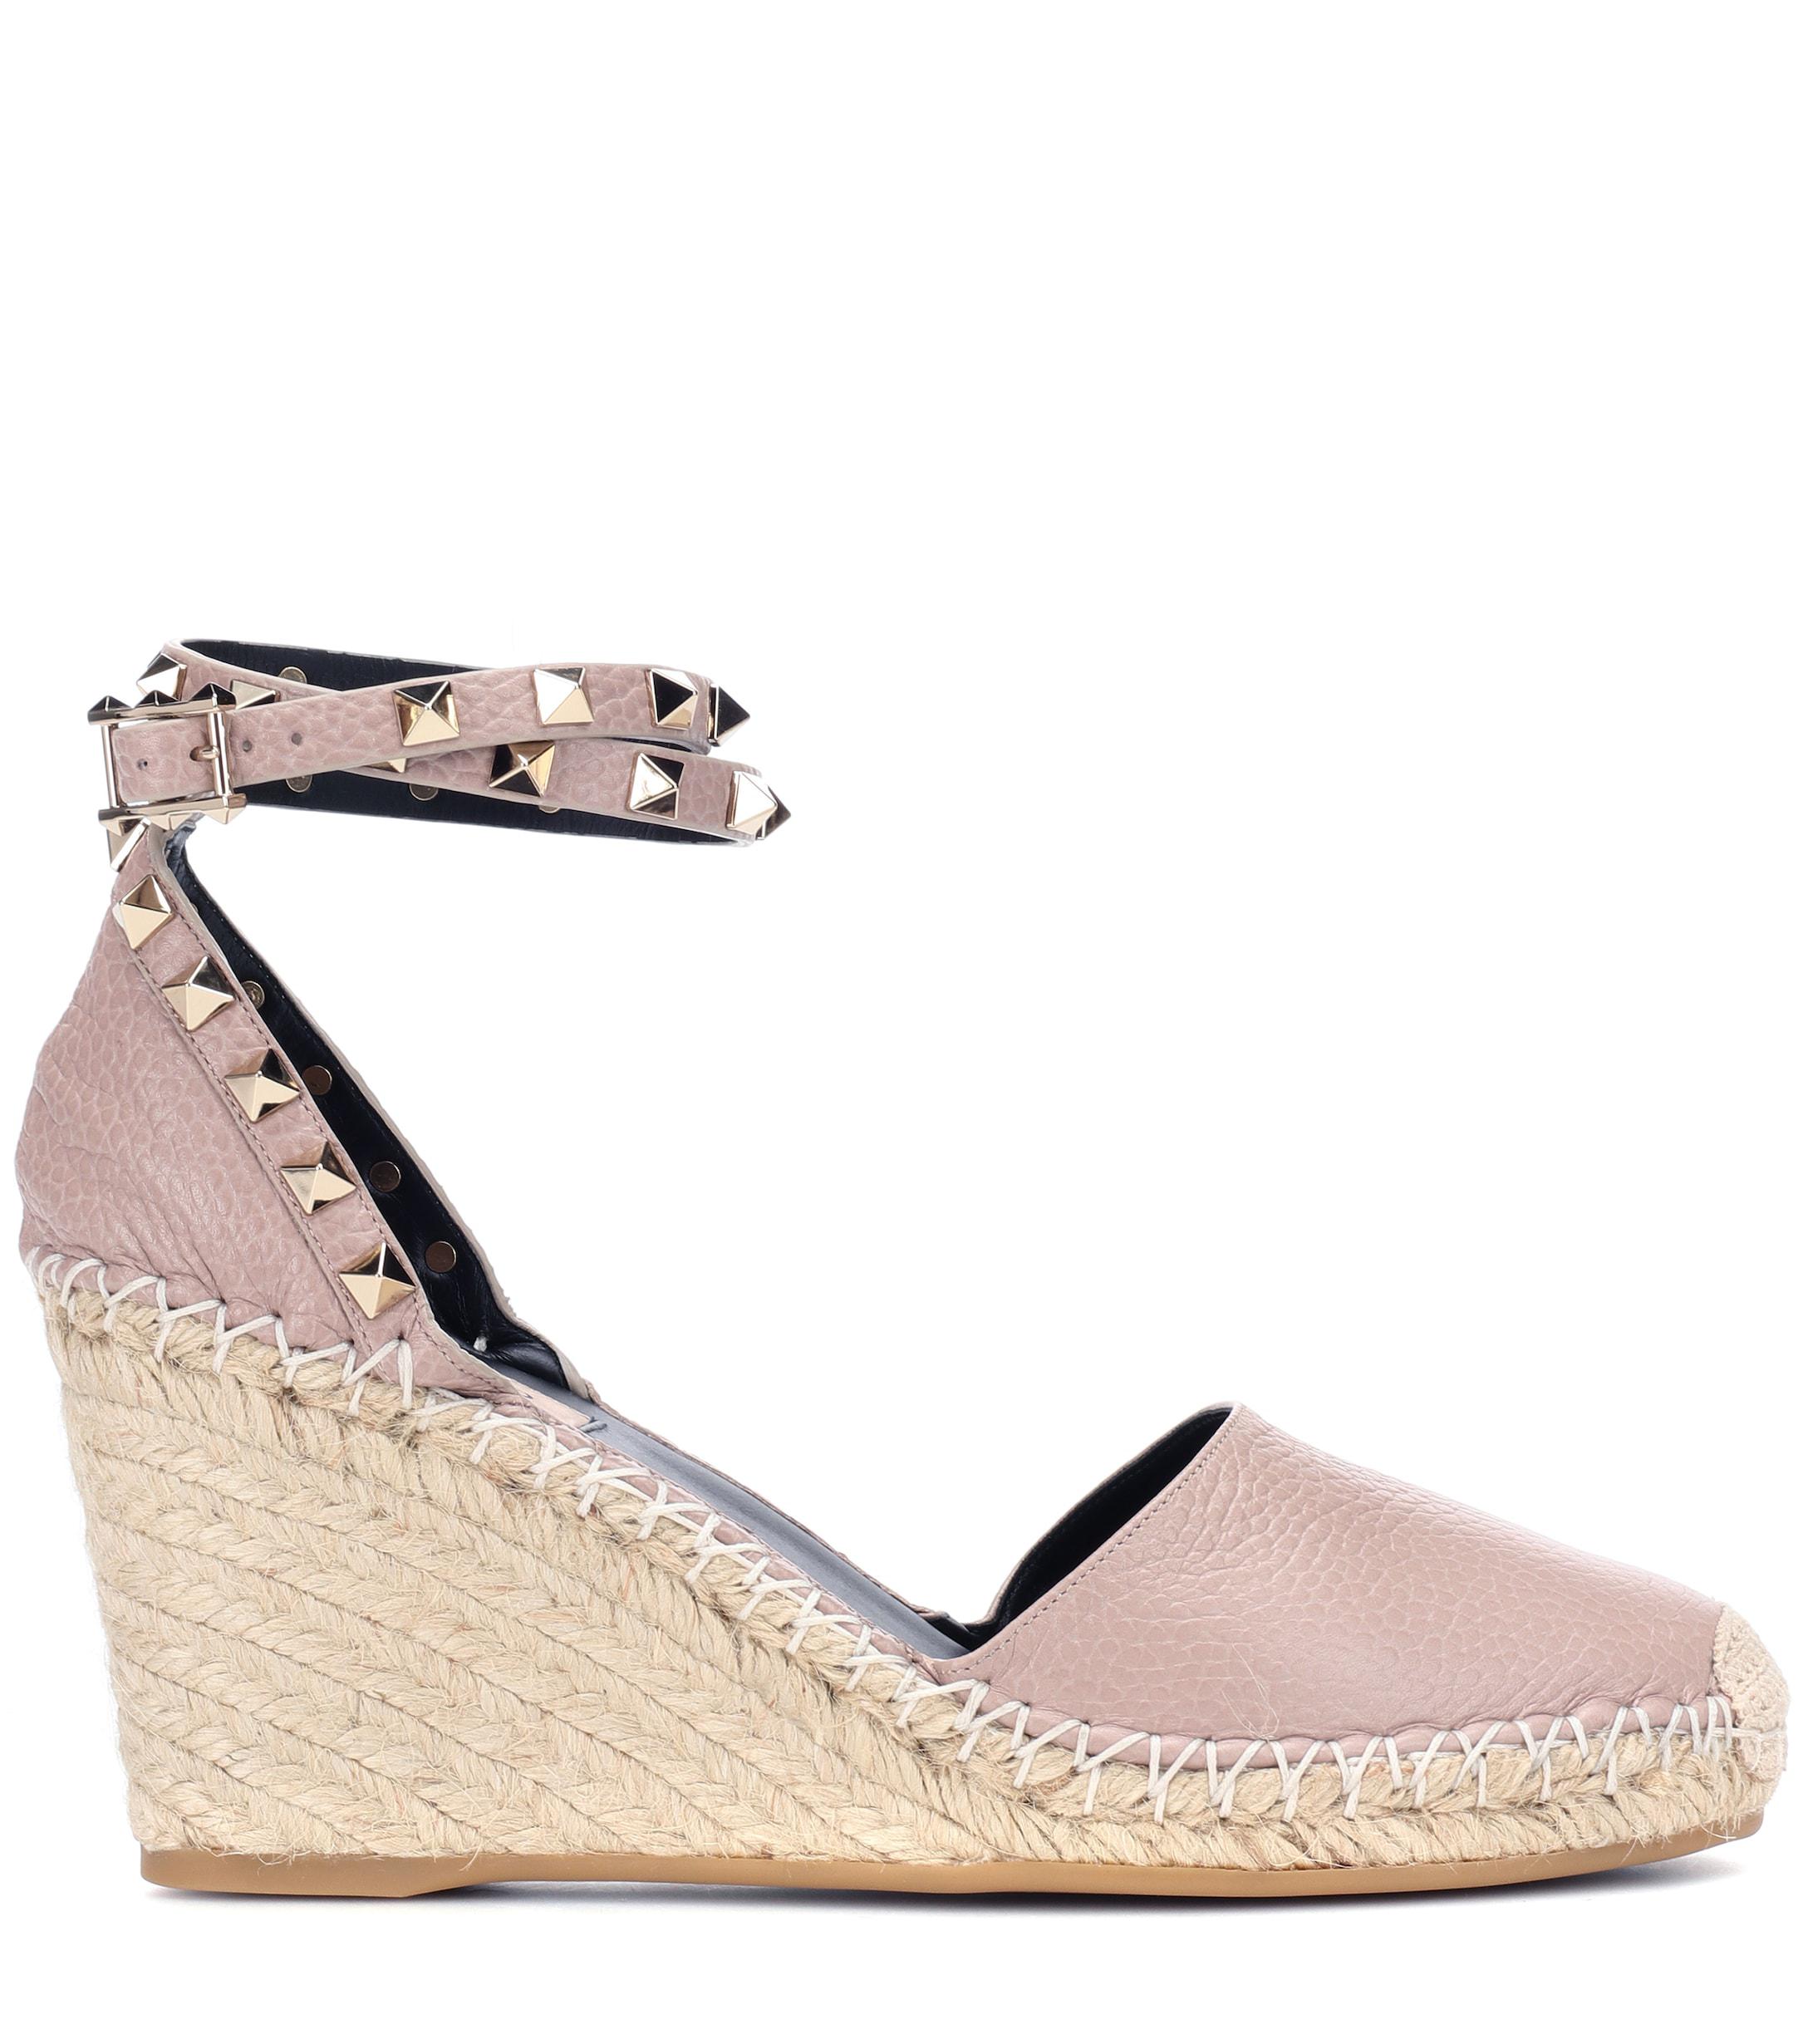 Valentino Rockstud Leather Wedge Espadrilles in Pink - Save 21% - Lyst